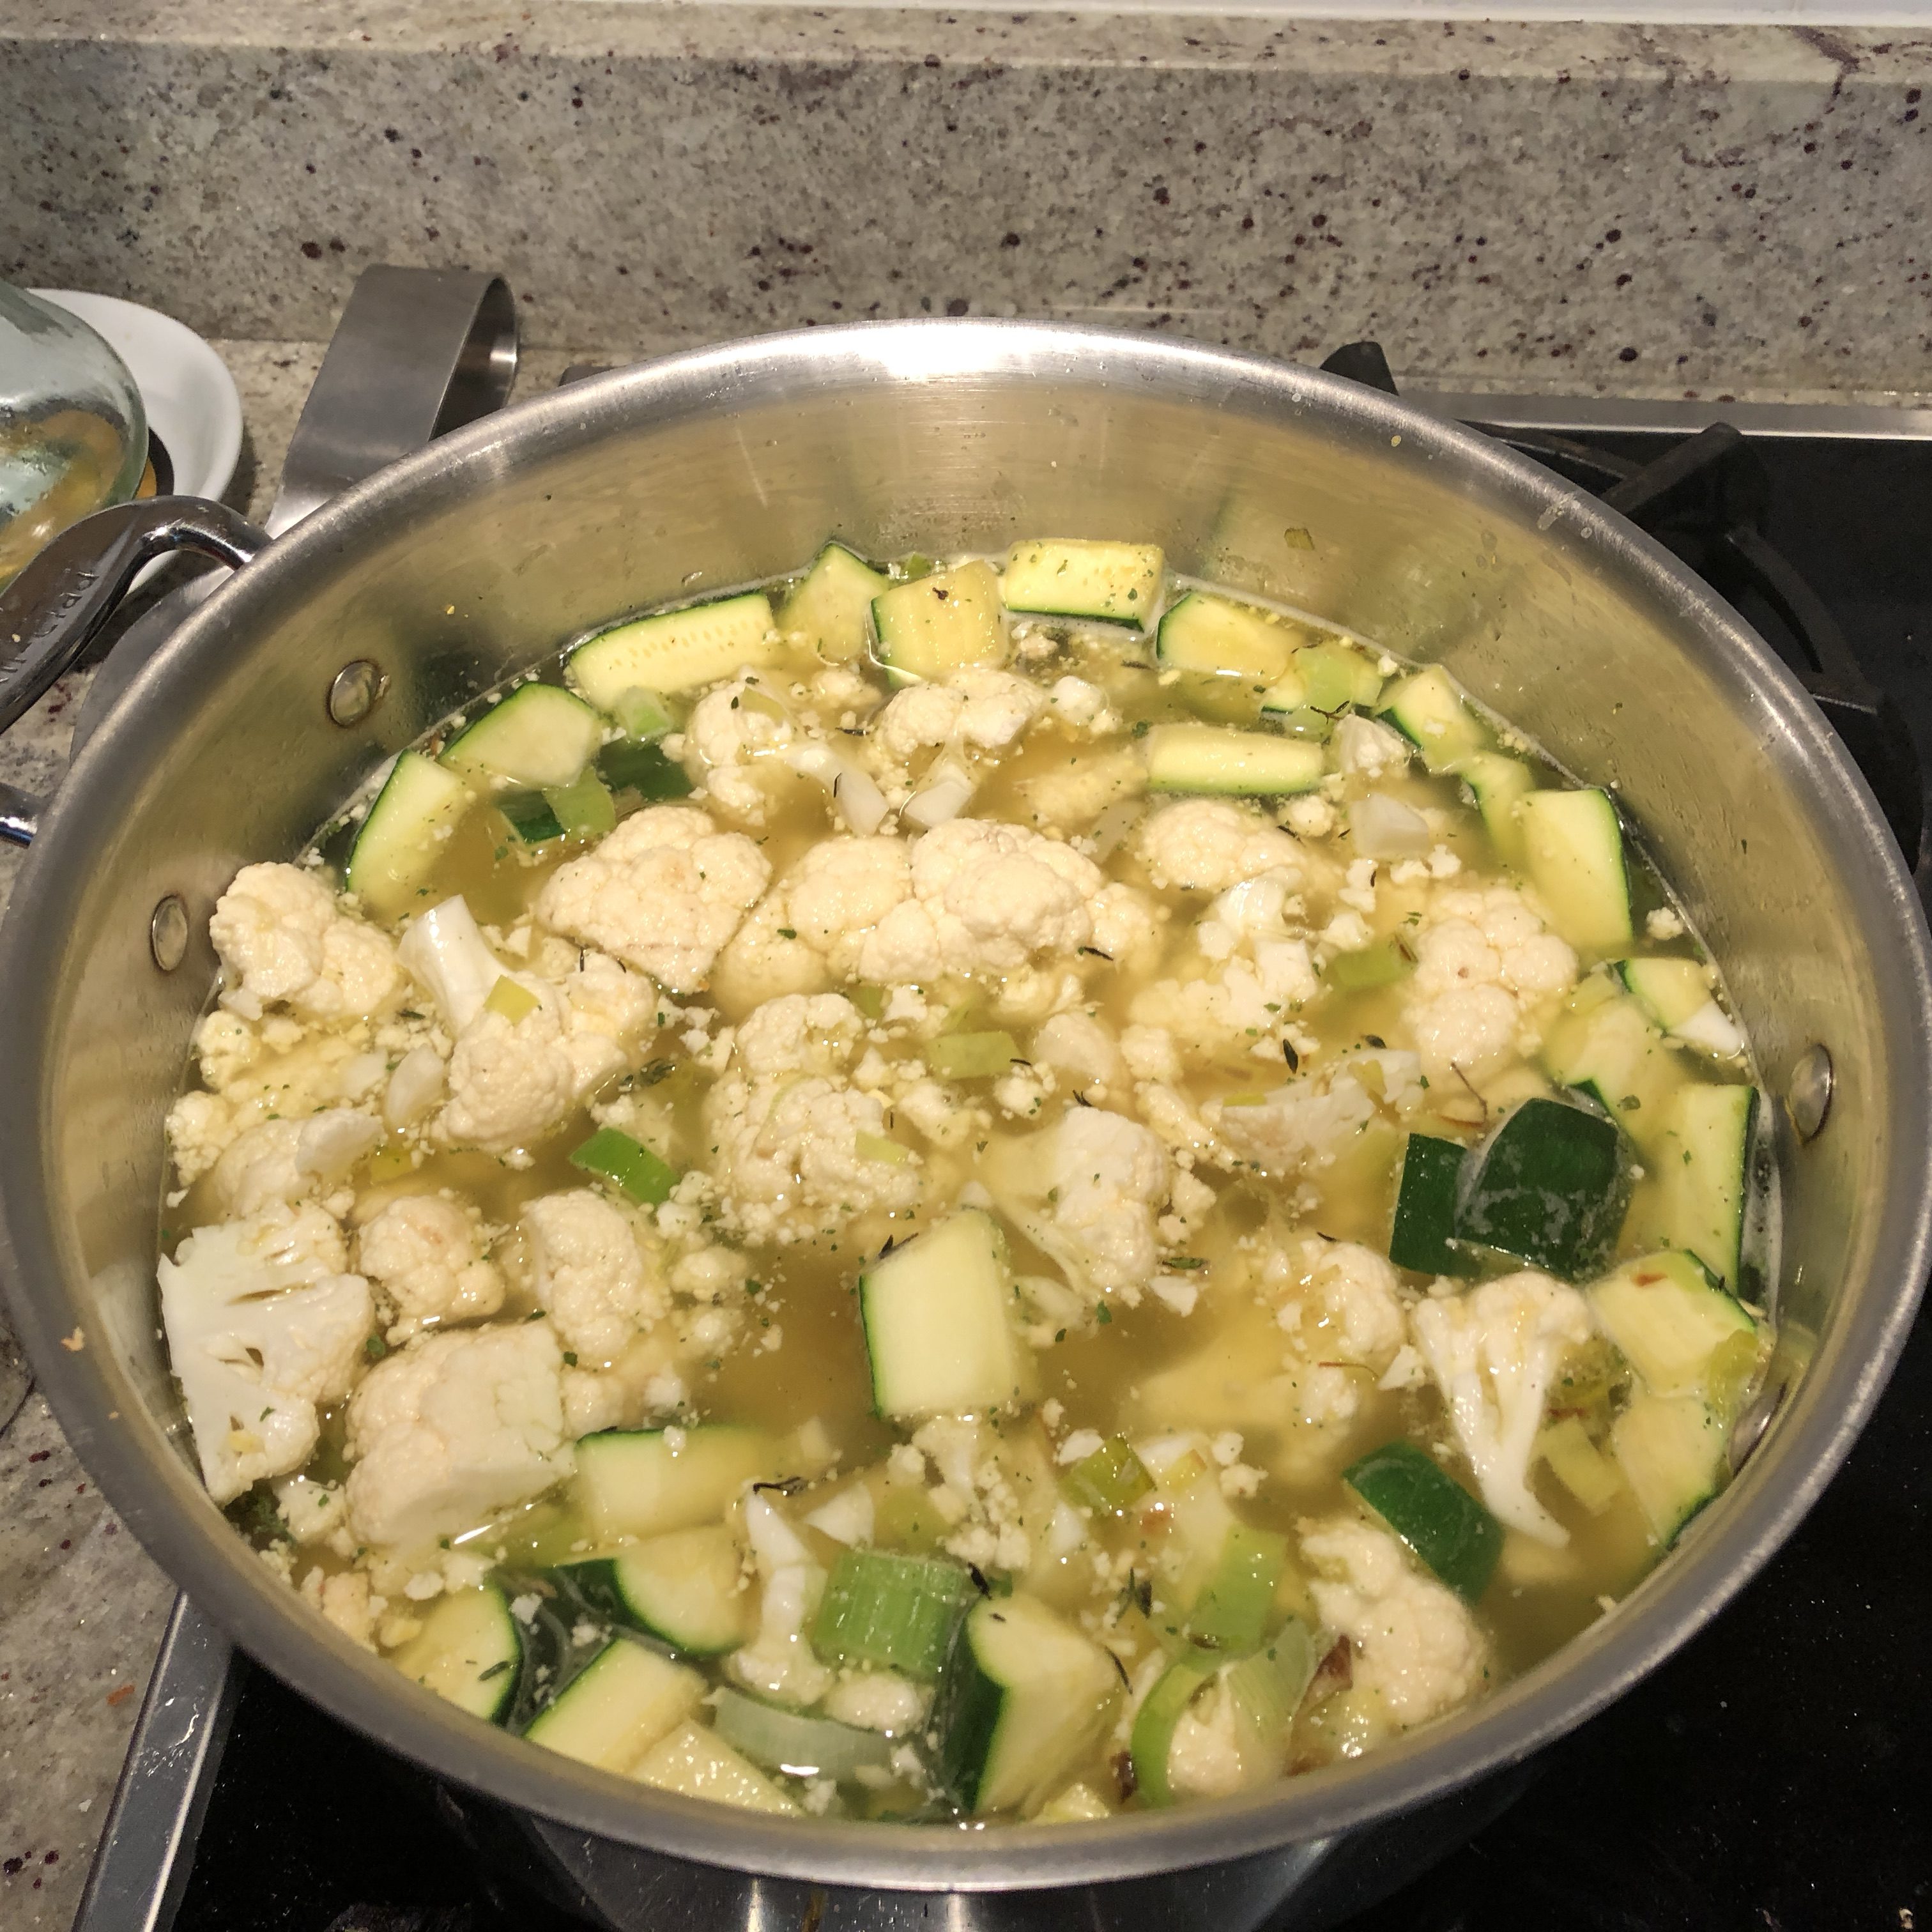 A wintry mix of vegetables on the stove